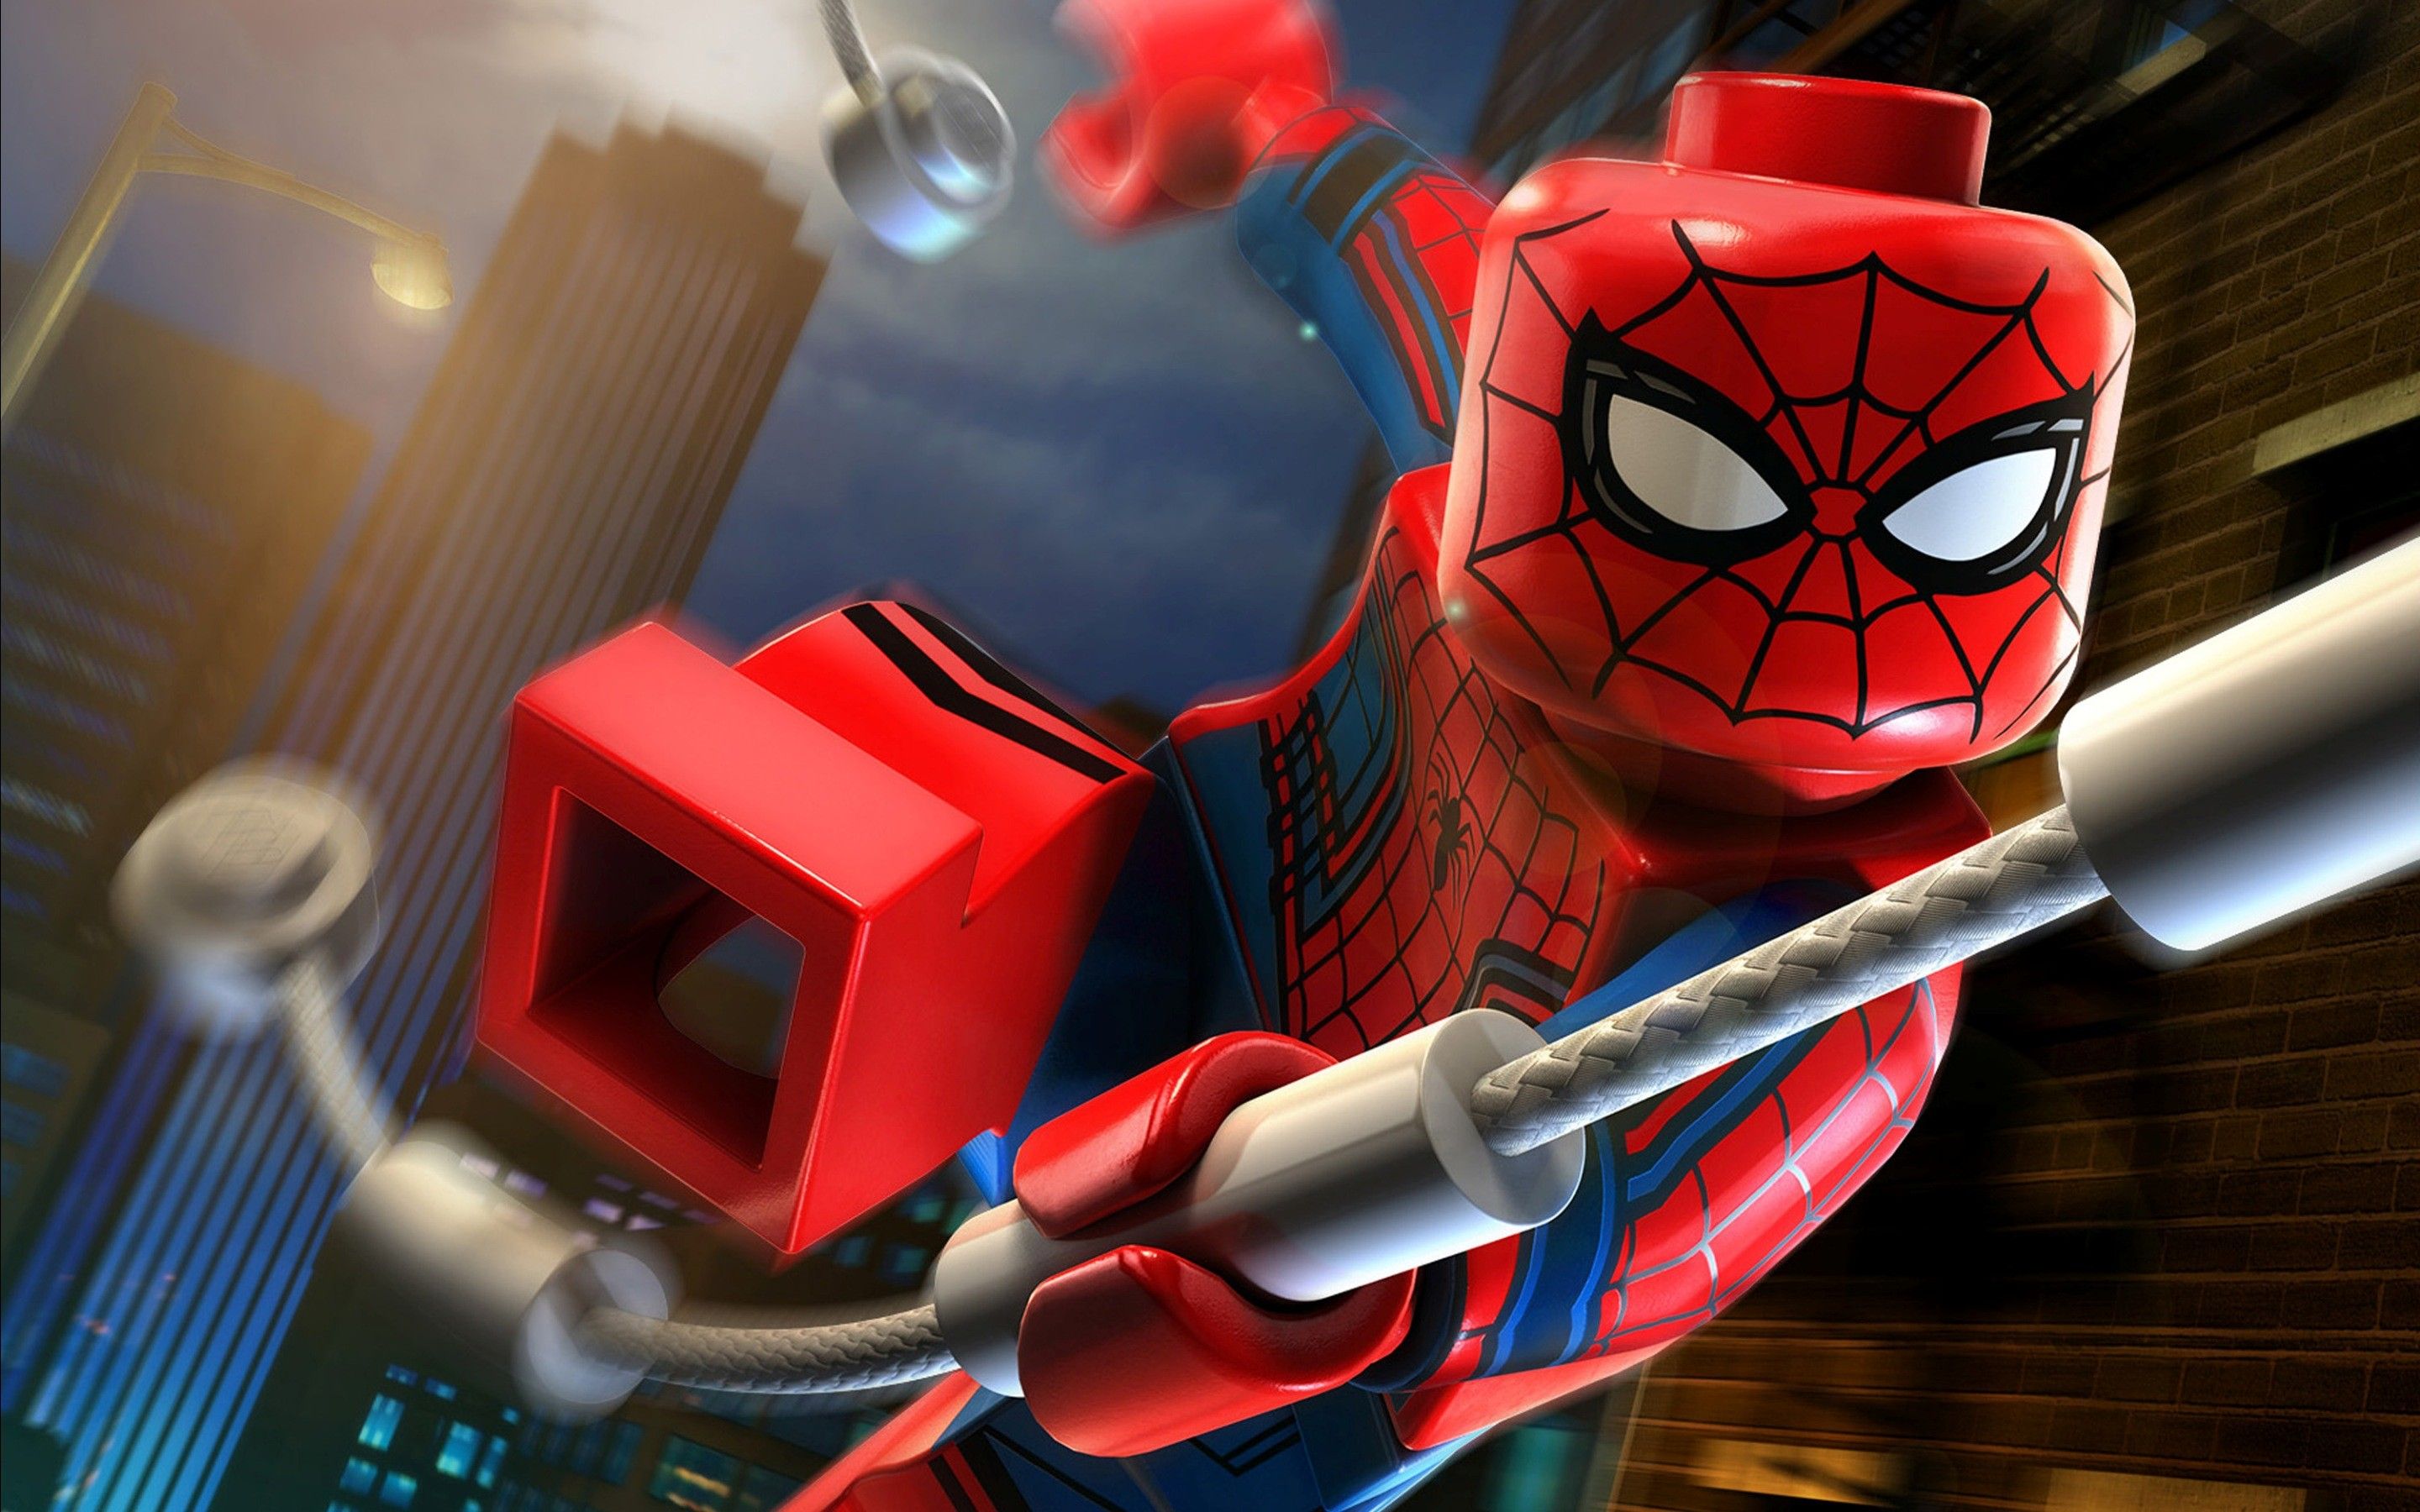 Free Download 63 Lego Spiderman Wallpaper [2880x1800] For Your Desktop, Mobile & Tablet. Explore Homecoming Civil War Spider Man Wallpaper. Homecoming Civil War Spider Man Wallpaper, Spider Man Homecoming Wallpaper